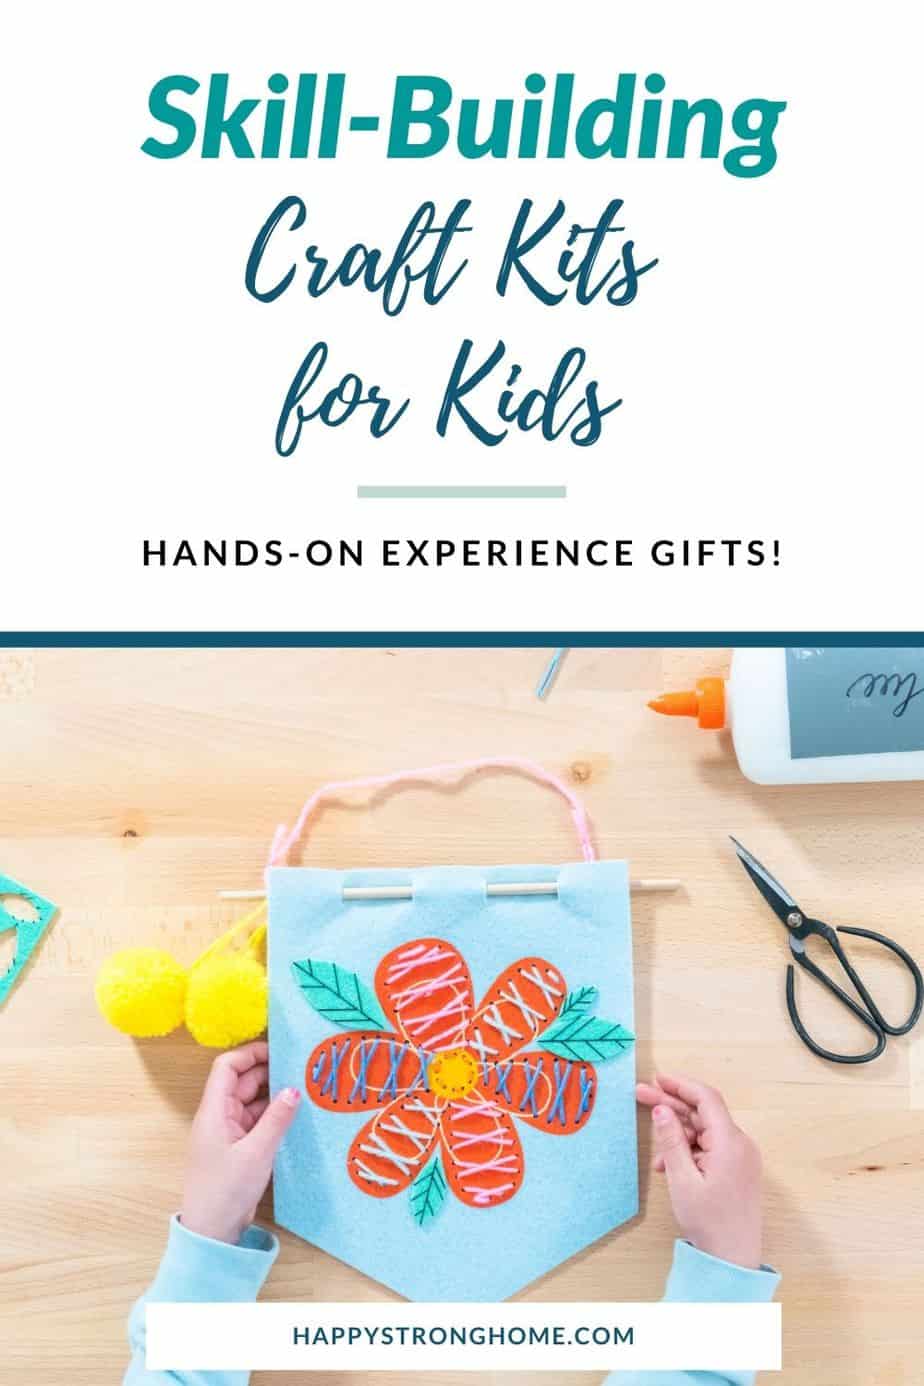 Skill-building craft kits for kids make great gifts! - Happy